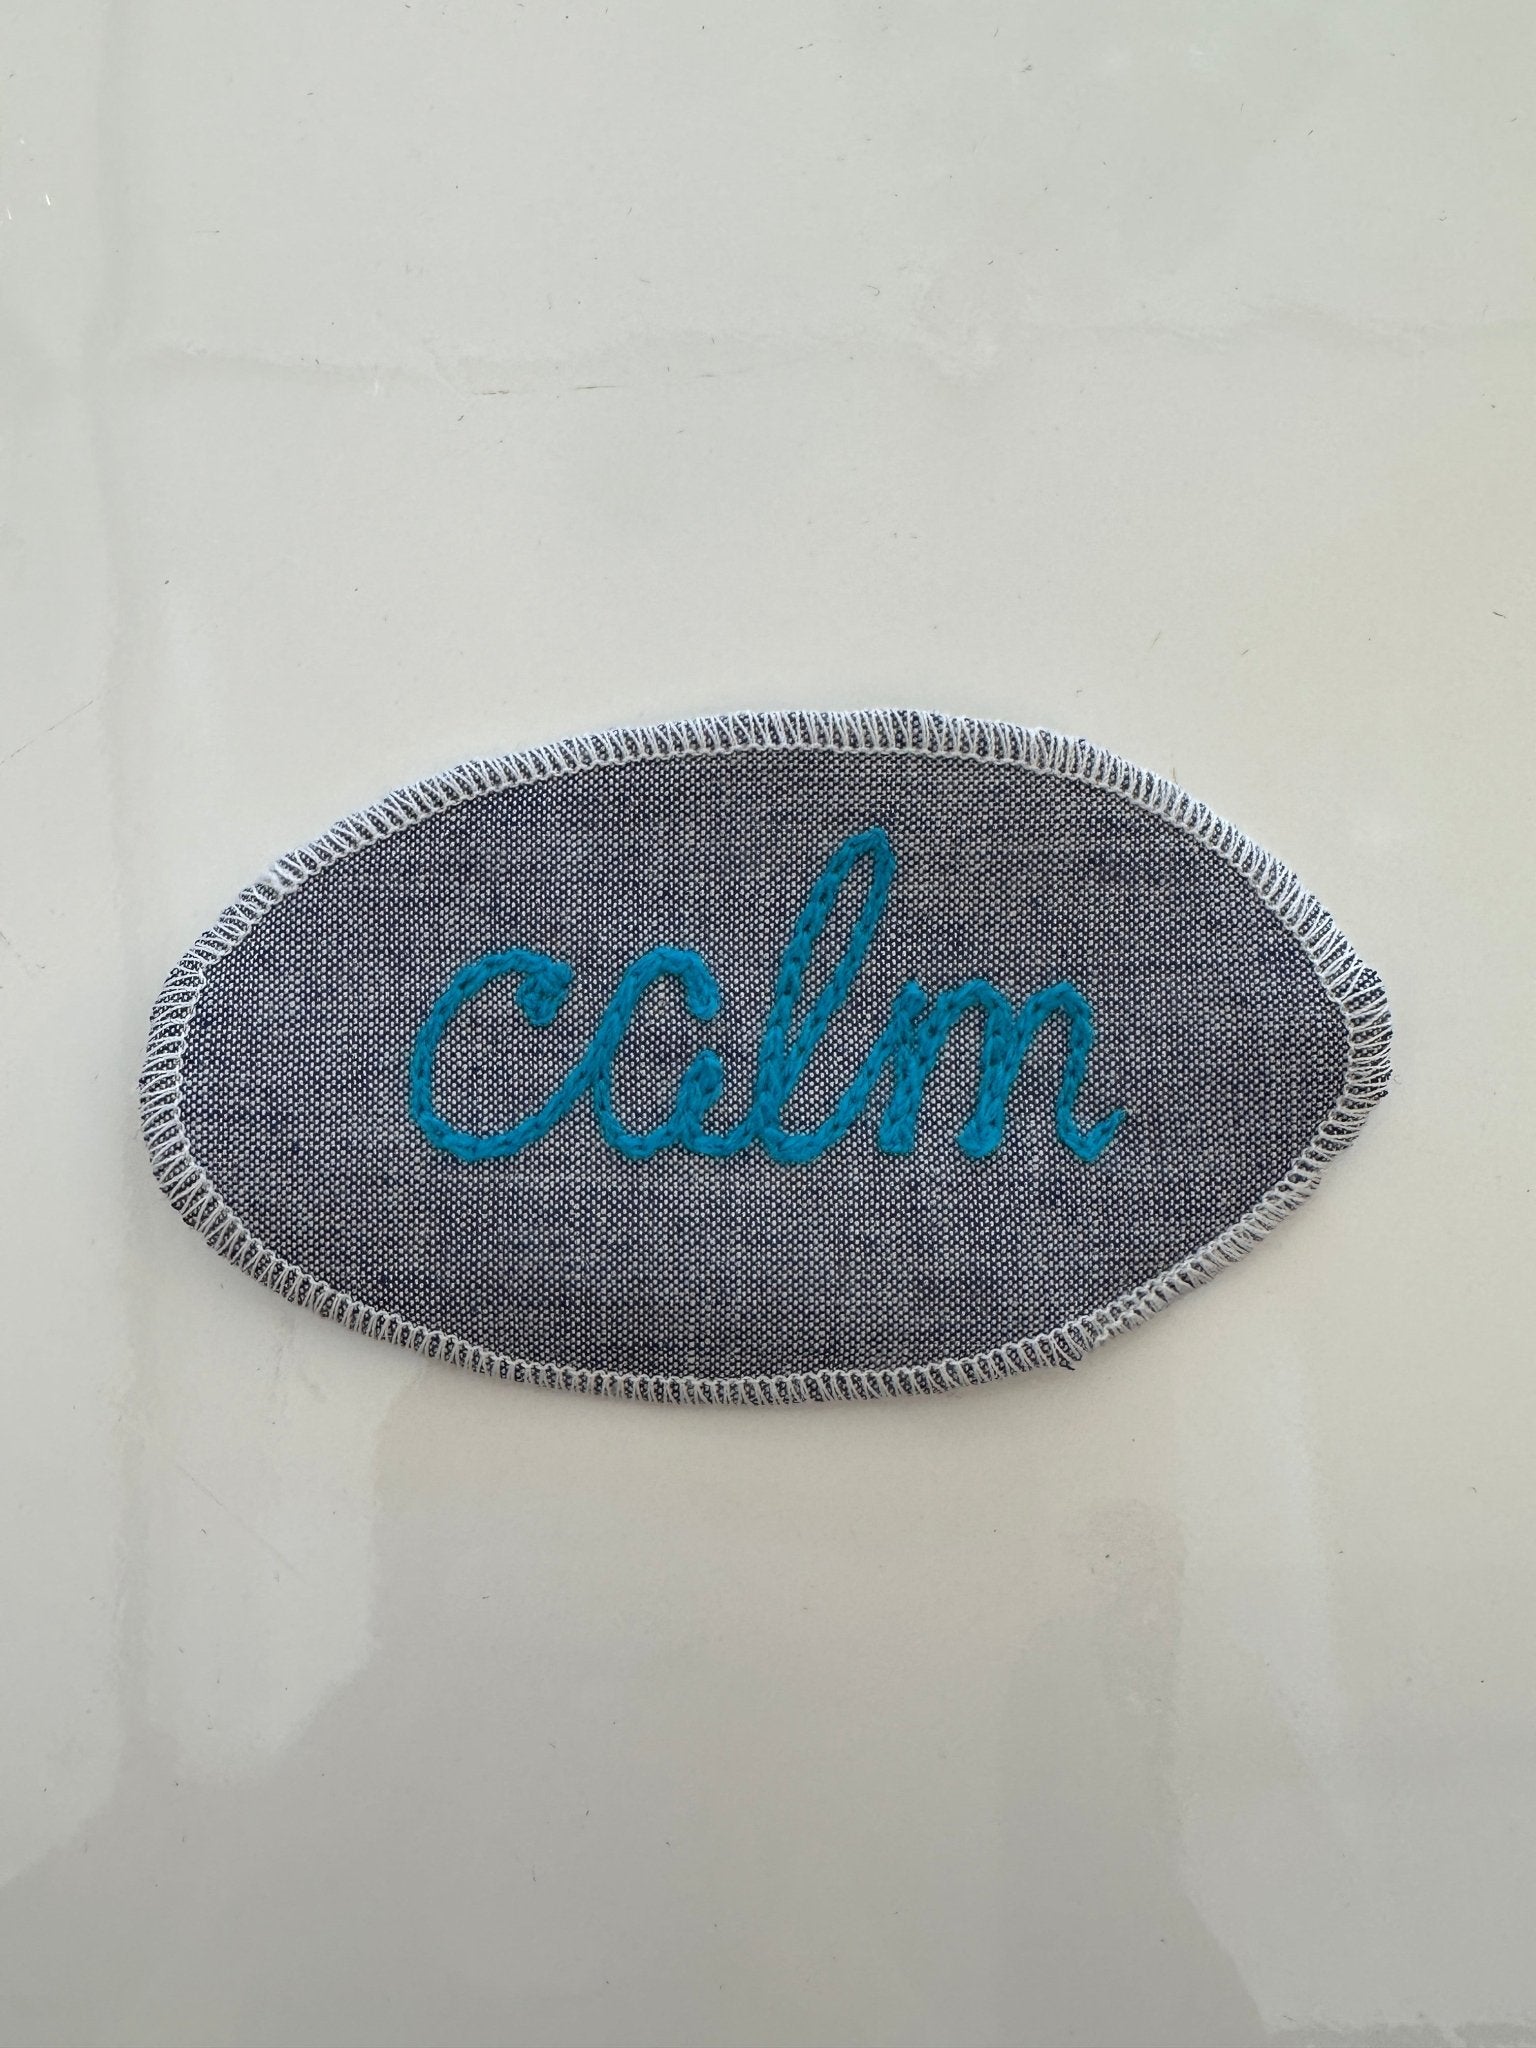 Cursive Words Hand Stitched Embroidery Patch - Joy